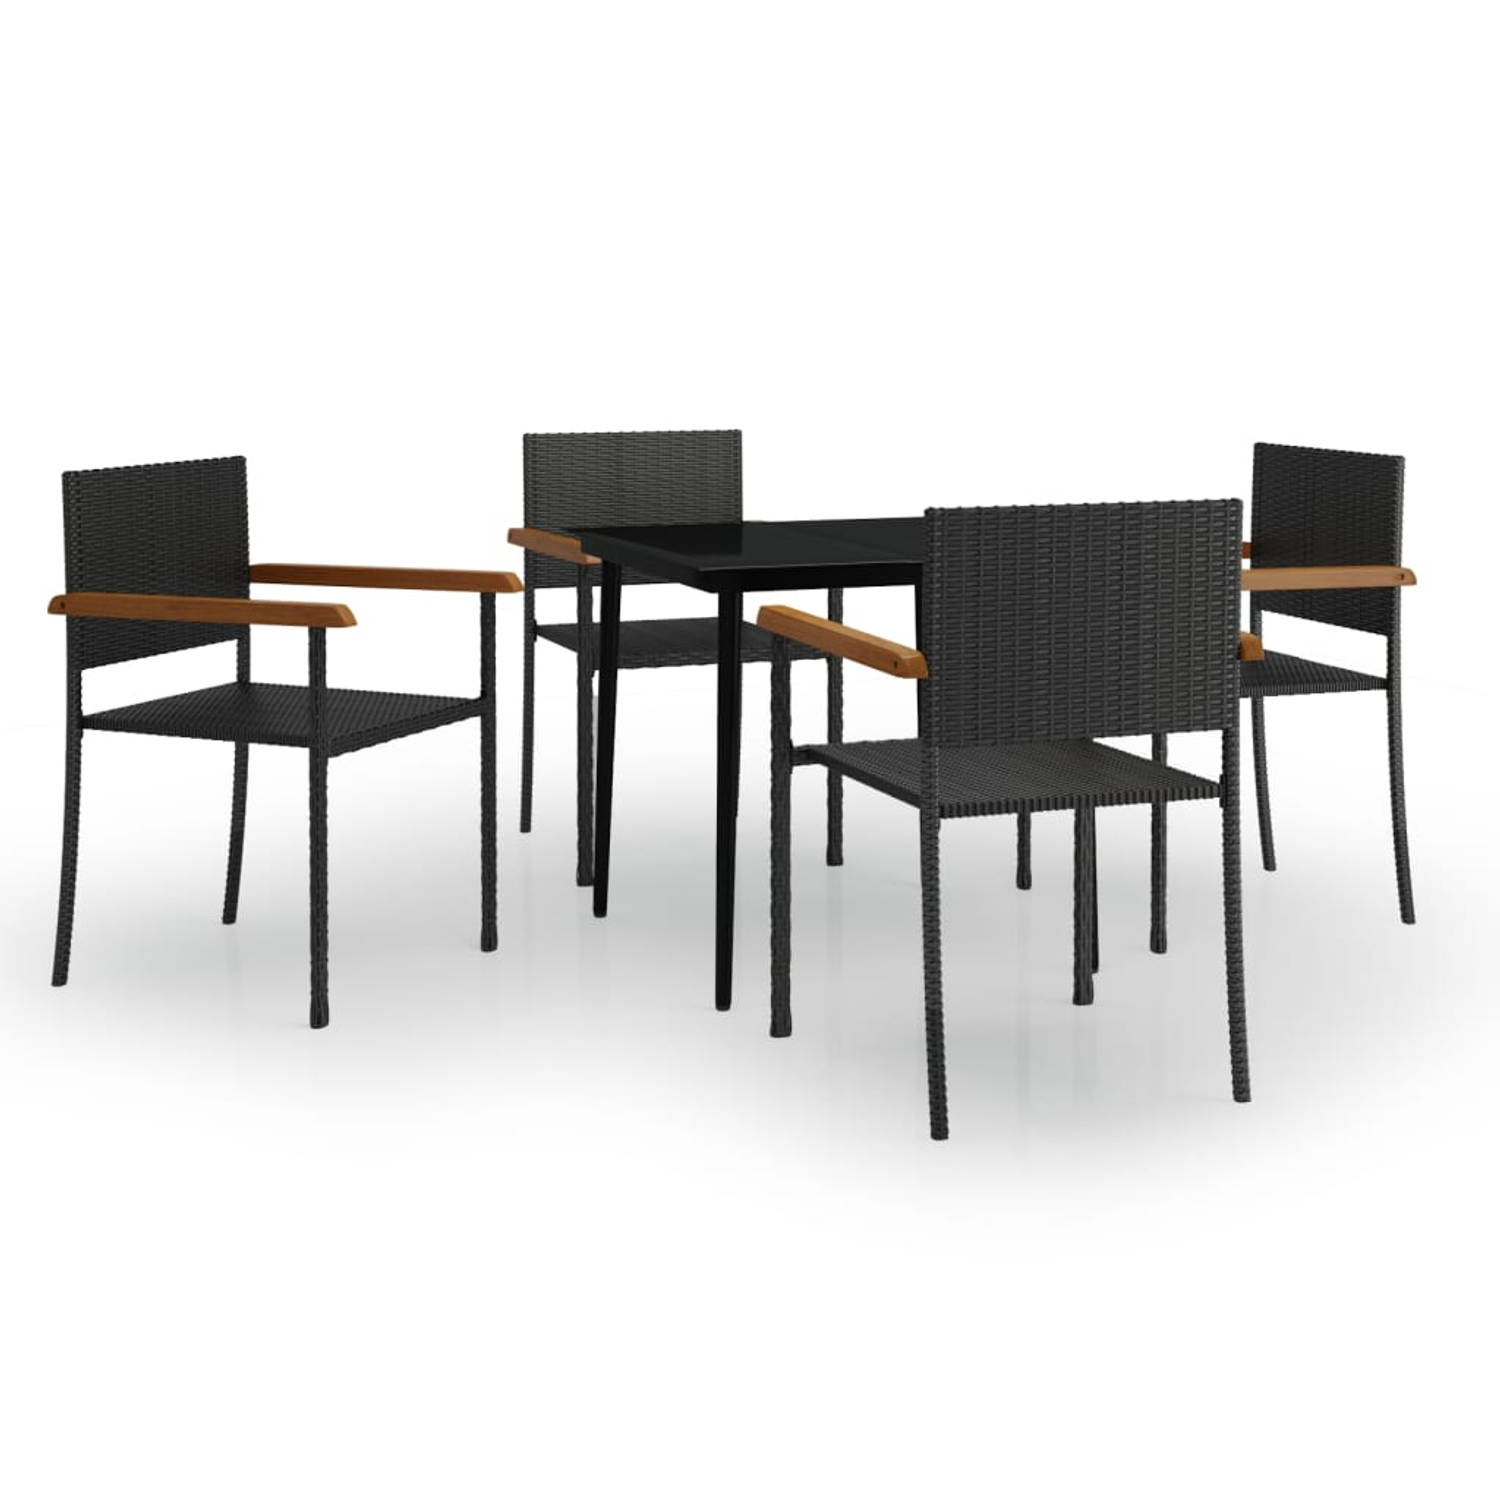 The Living Store Tuinmeubelset - Acaciahout - PE-rattan - Staal - Glas - Zwart - 80x80x74cm - 4 Stoelen